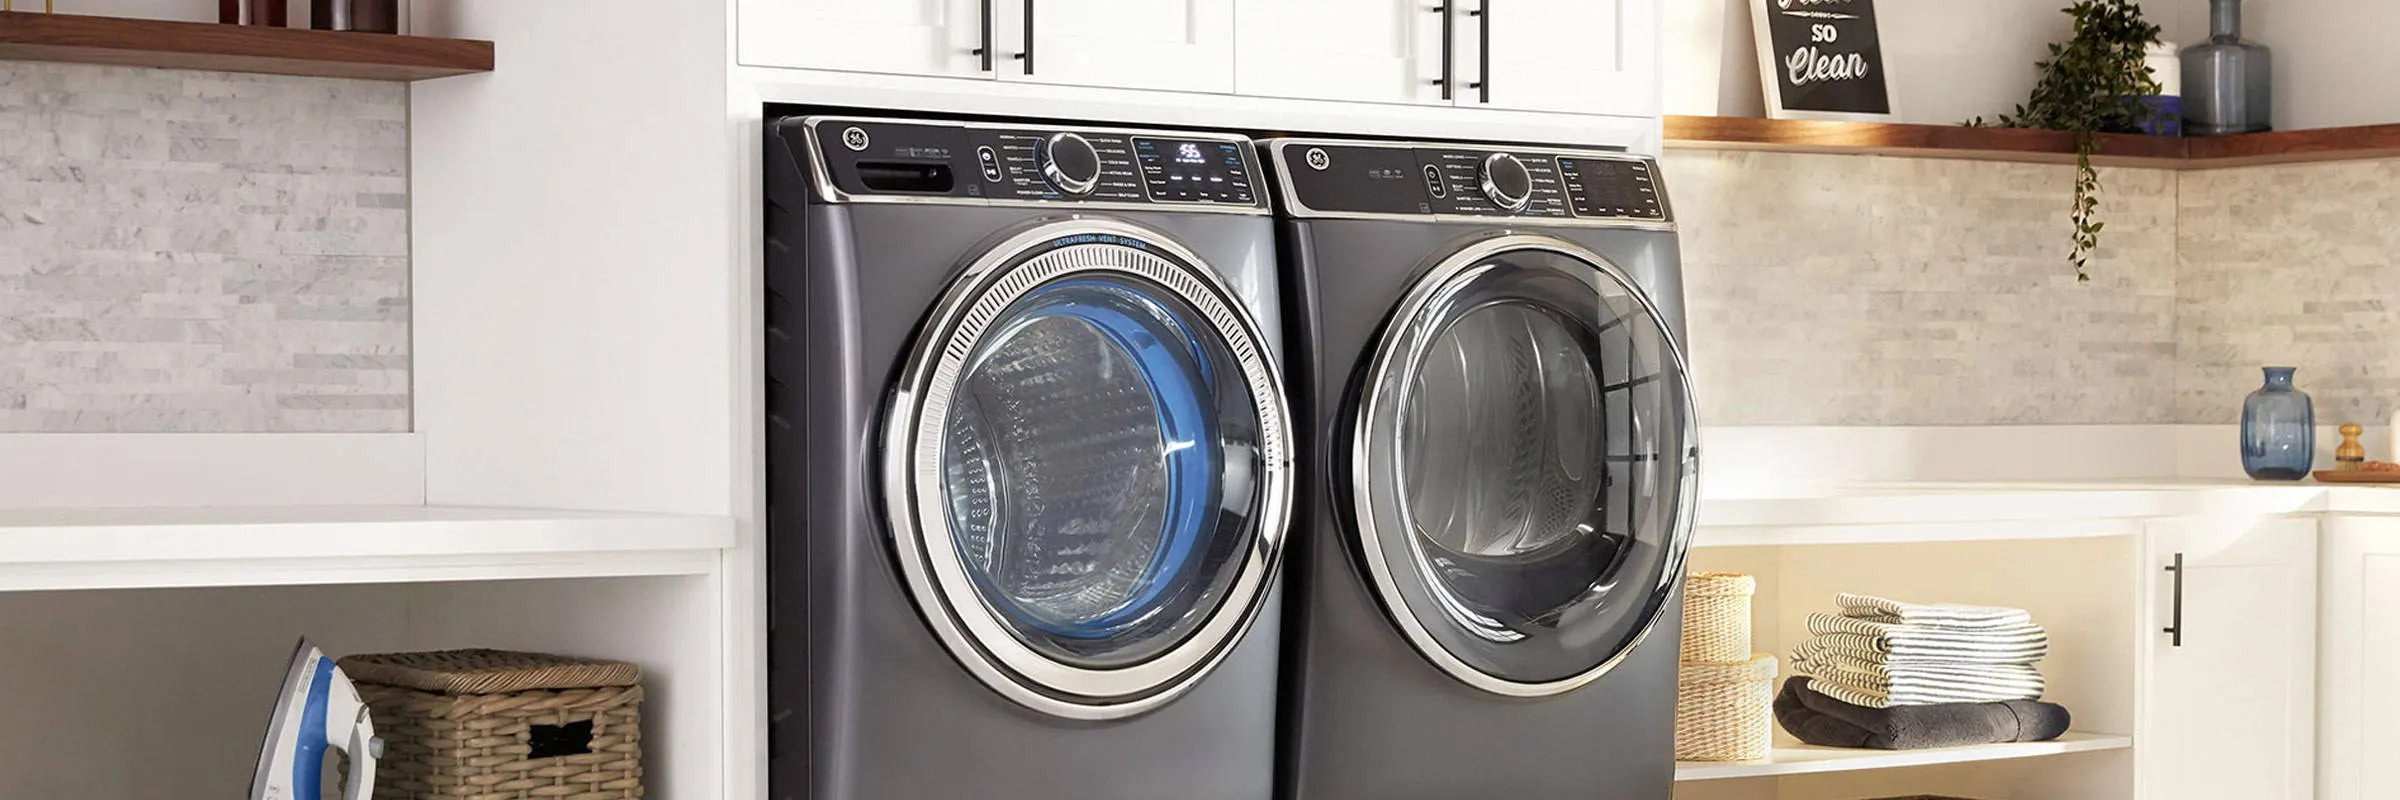 4 Best GE Washer and Dryer Sets Idler's Home Central California